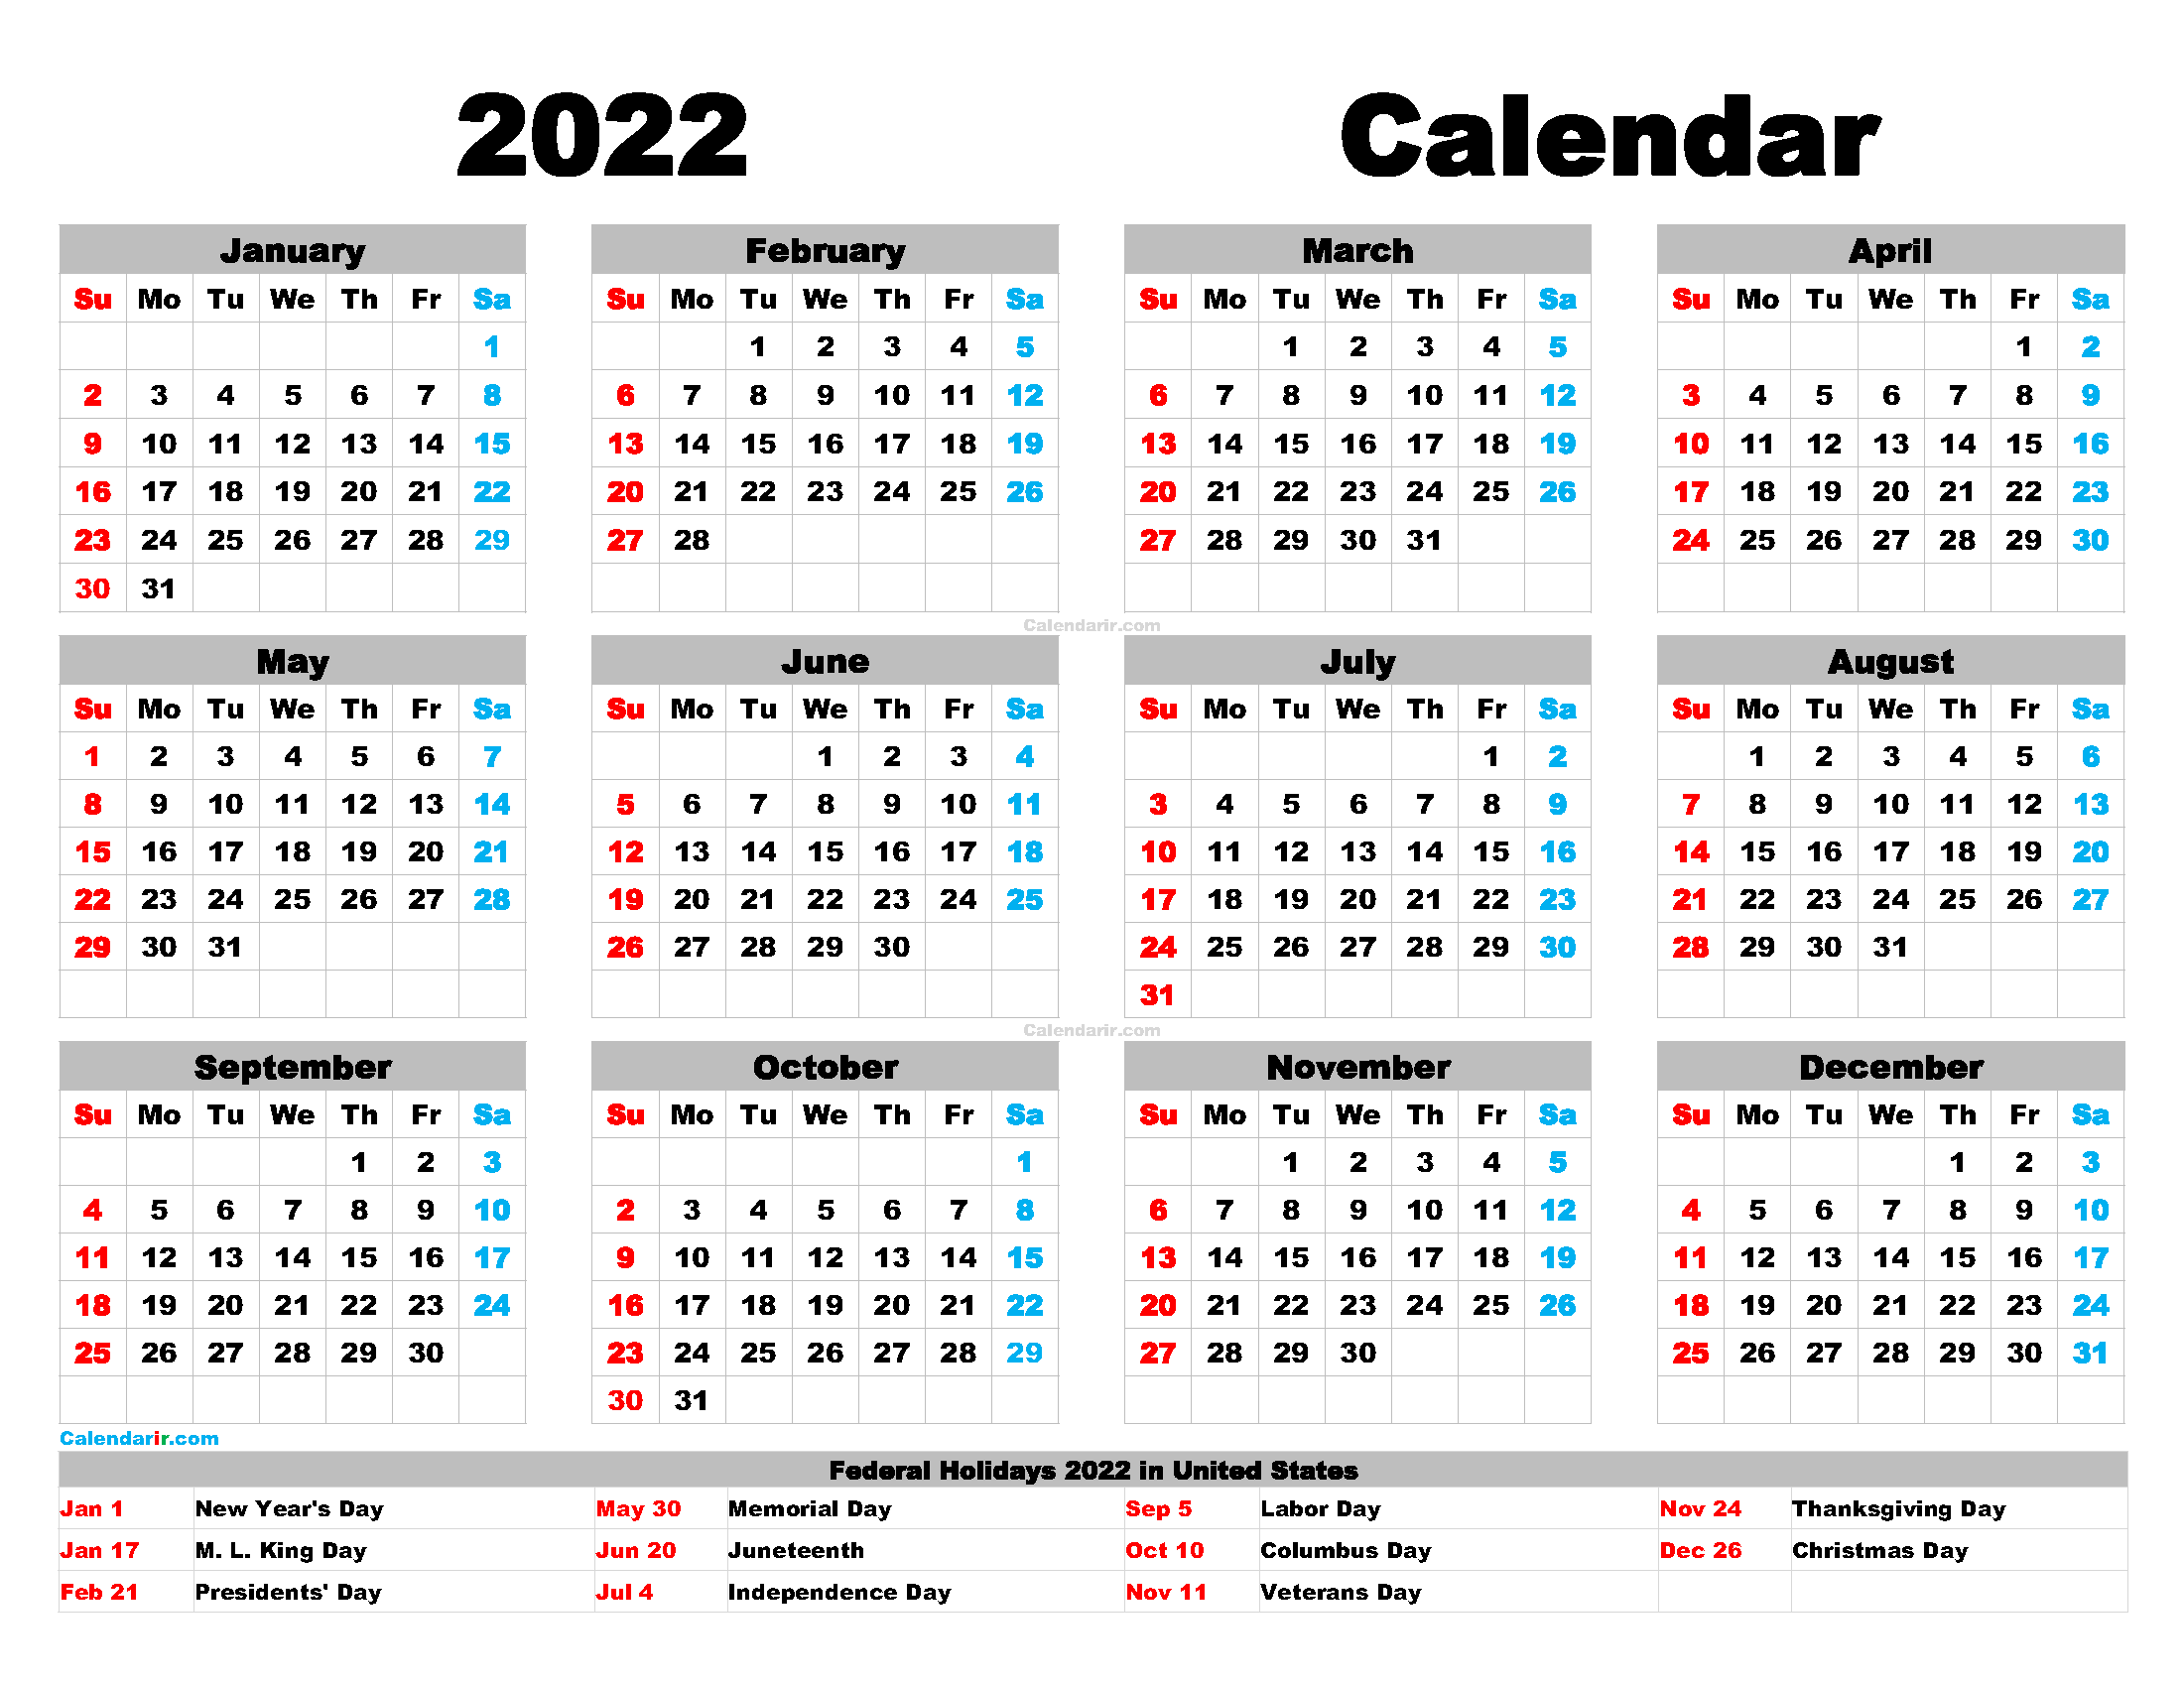 Free 2022 Calendar By Mail Free Printable 2022 Calendar With Holidays (Pdf And Image)